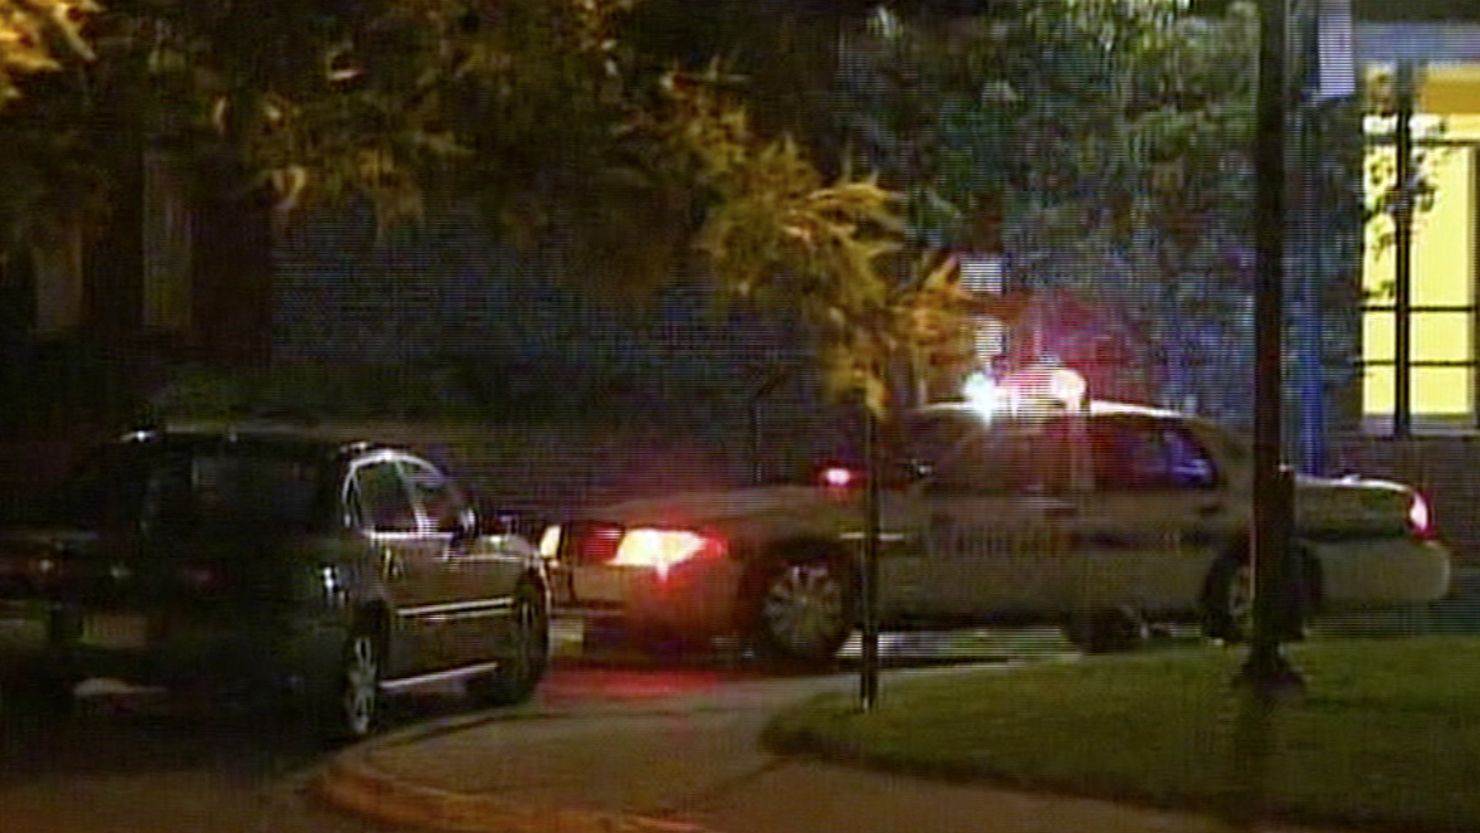 Police apparently investigate the stabbing in this picture from WJLA video.